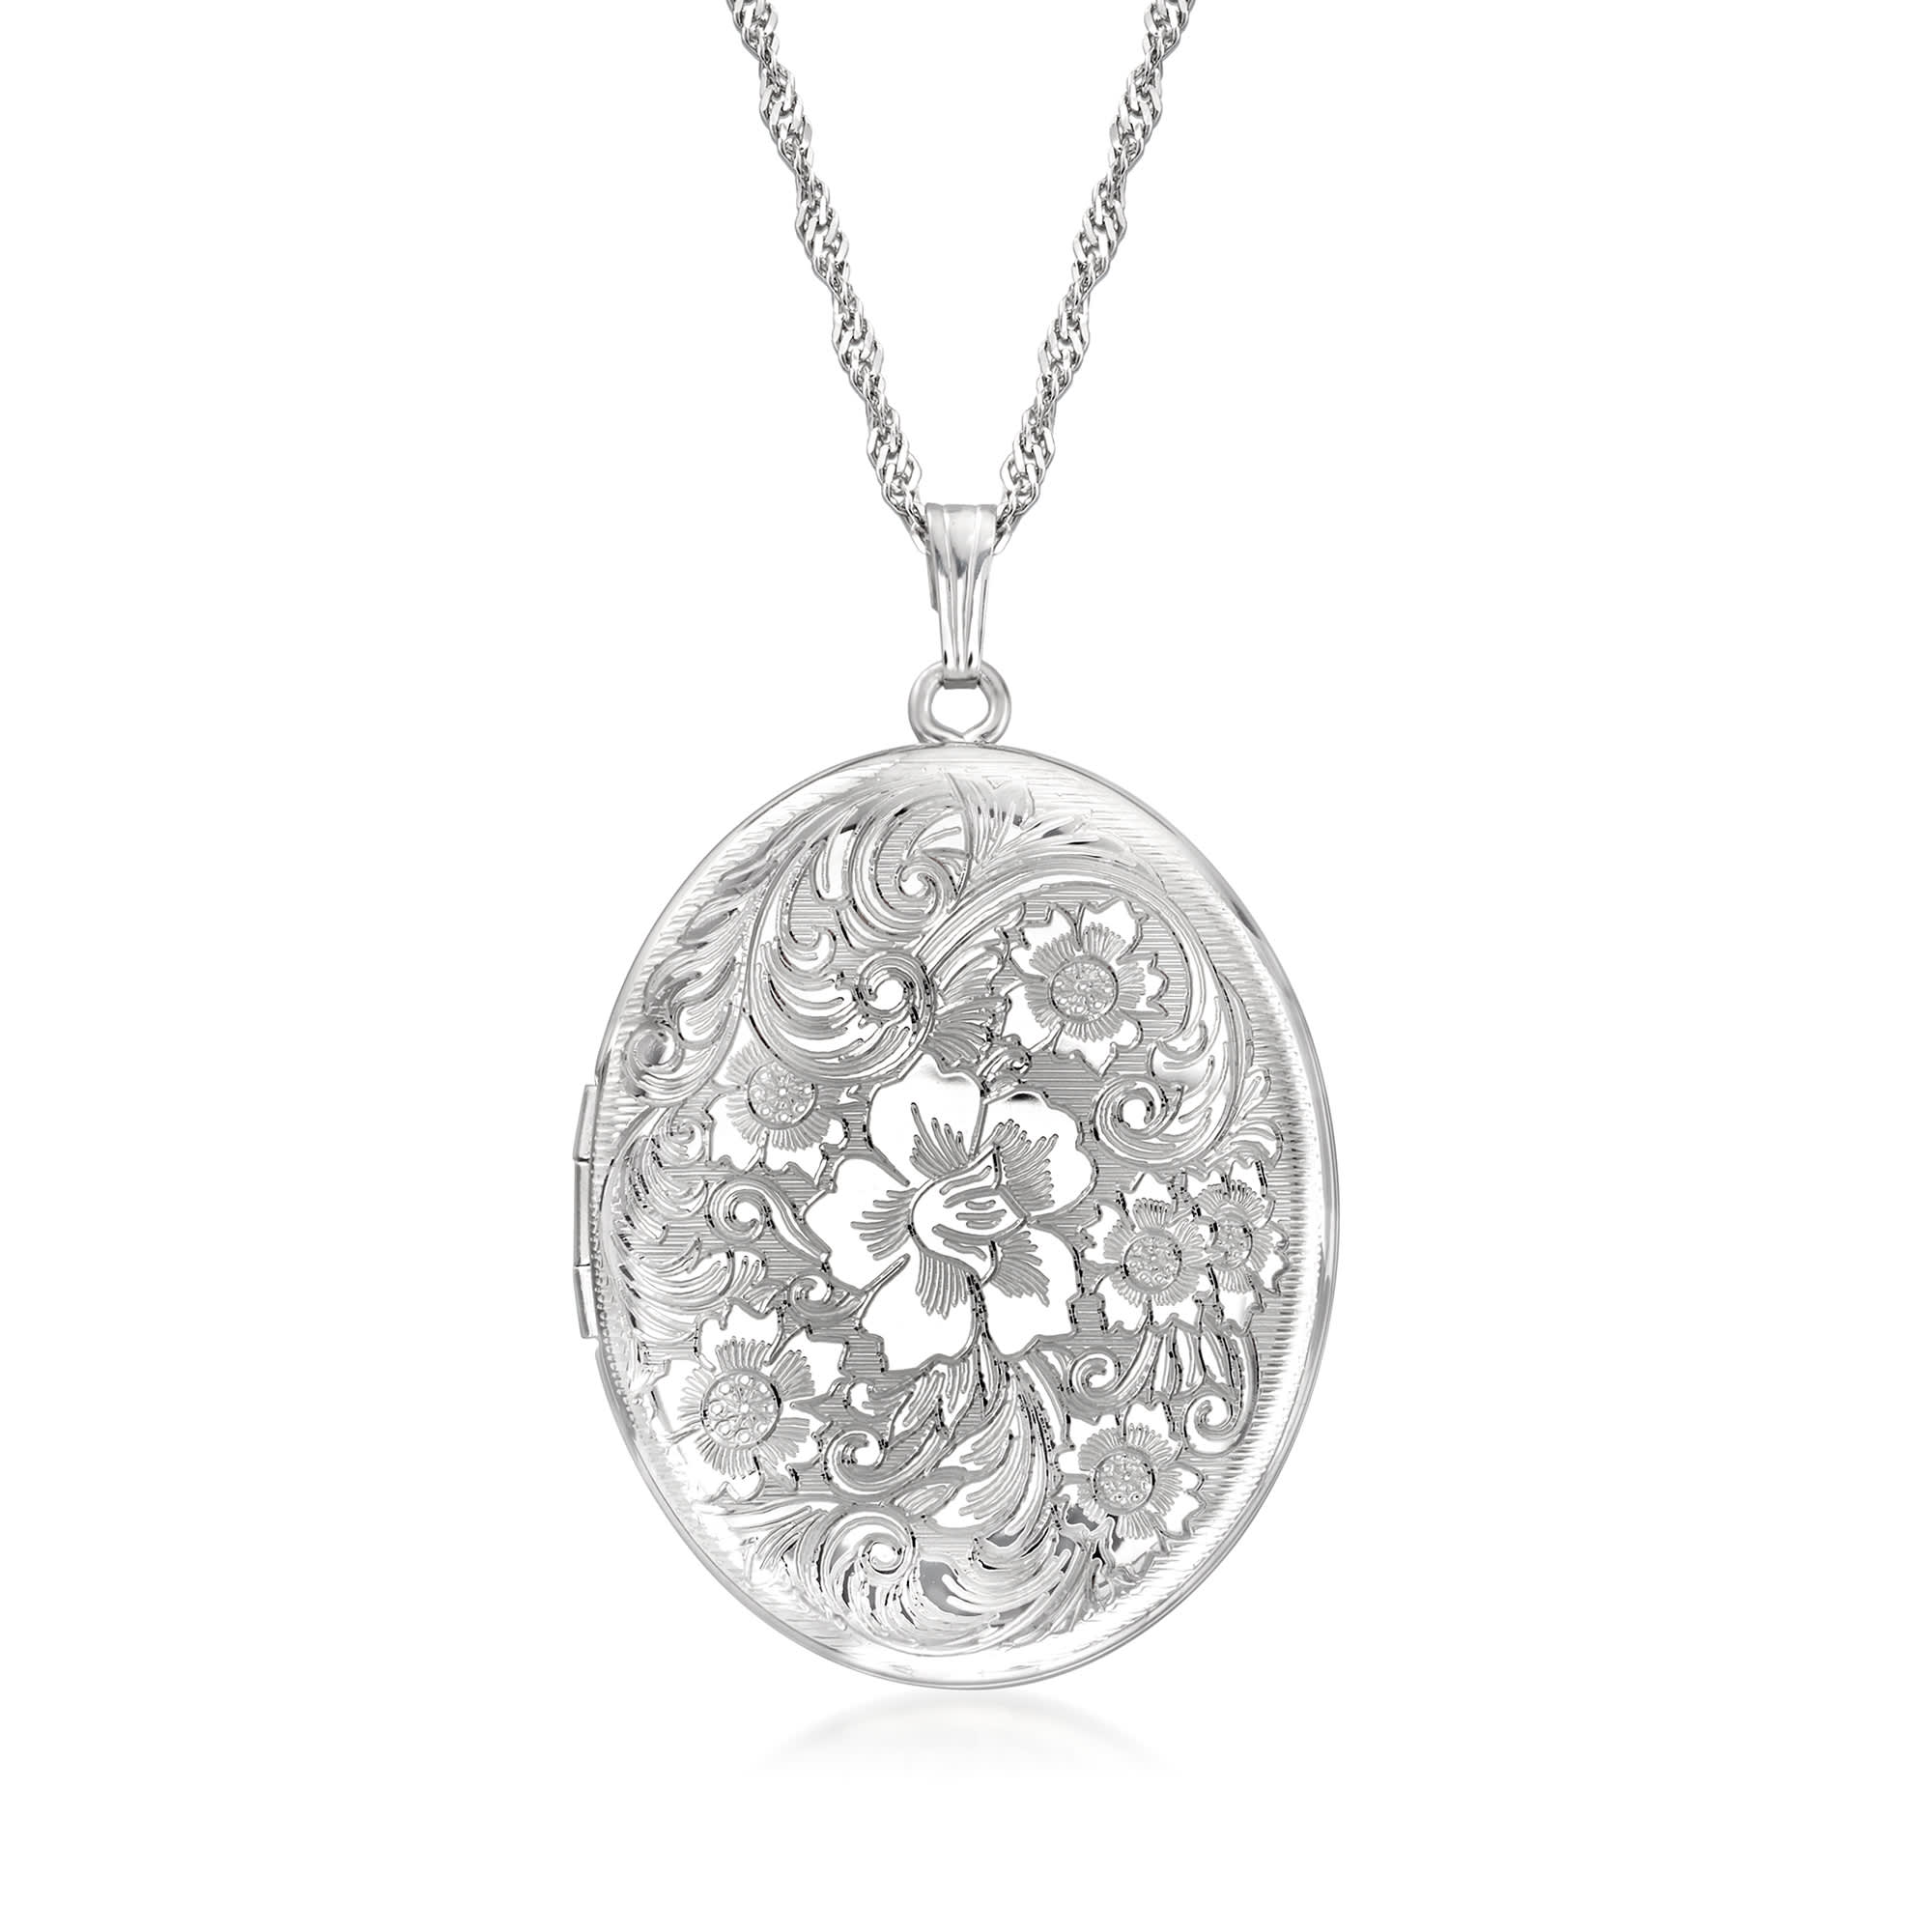 Ross-Simons - Plain - Sterling Silver Four-Photo Oval Locket Necklace. 20